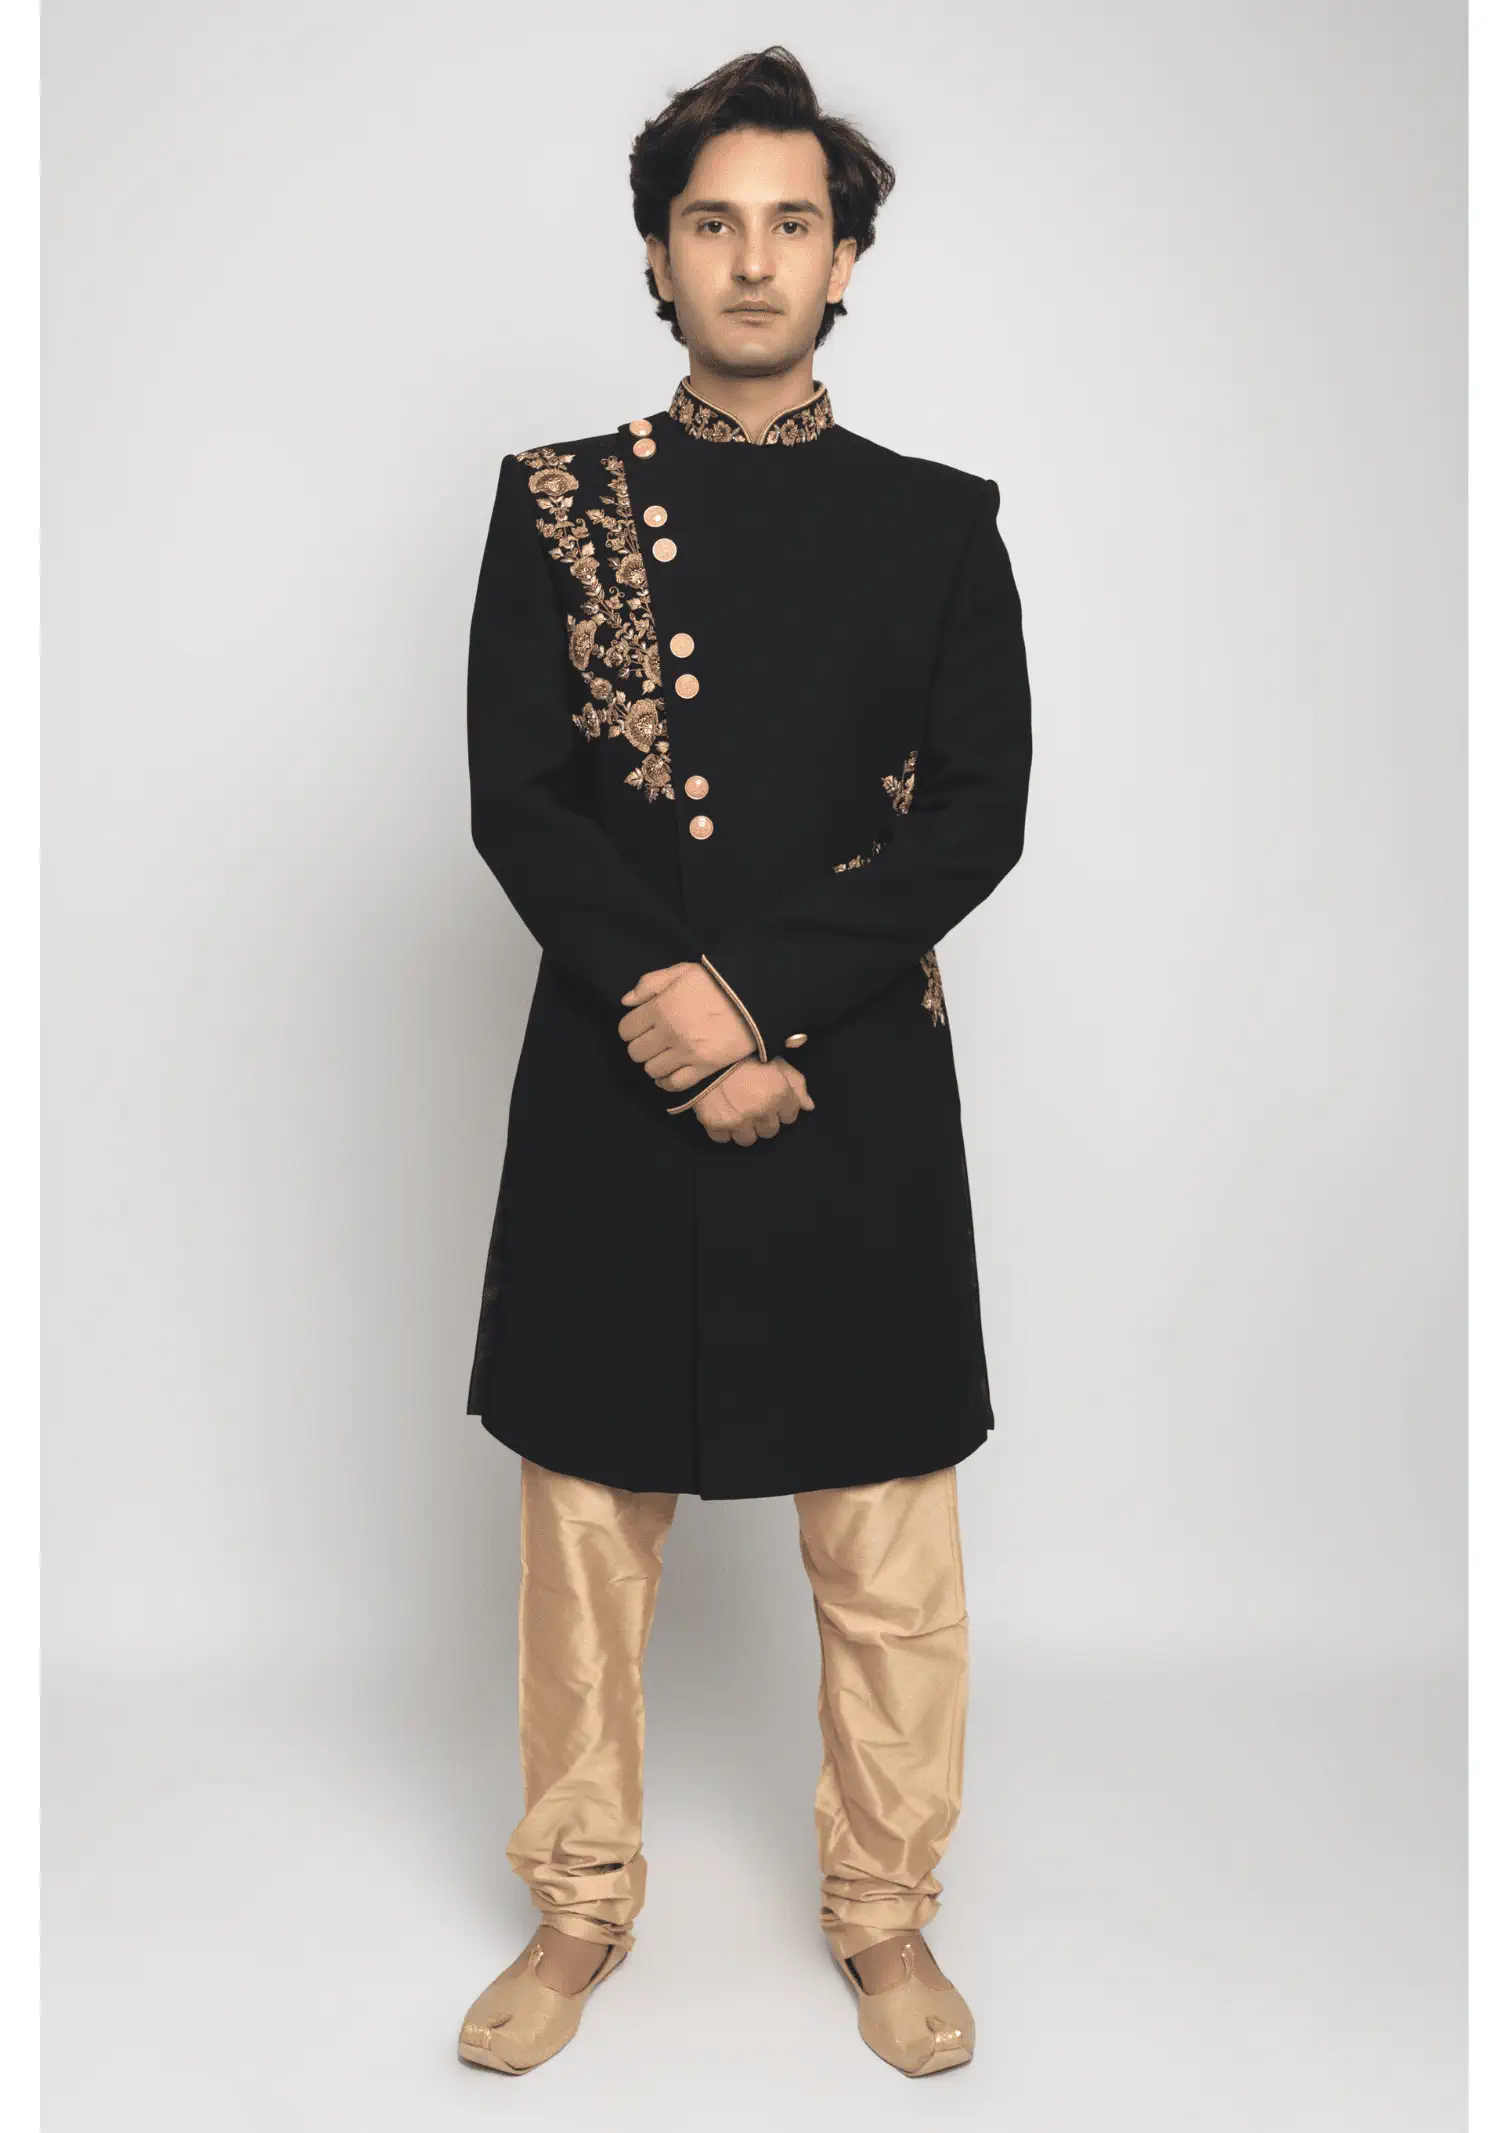 Black & Gold Achkan with intricate Hued Floral Embroidery